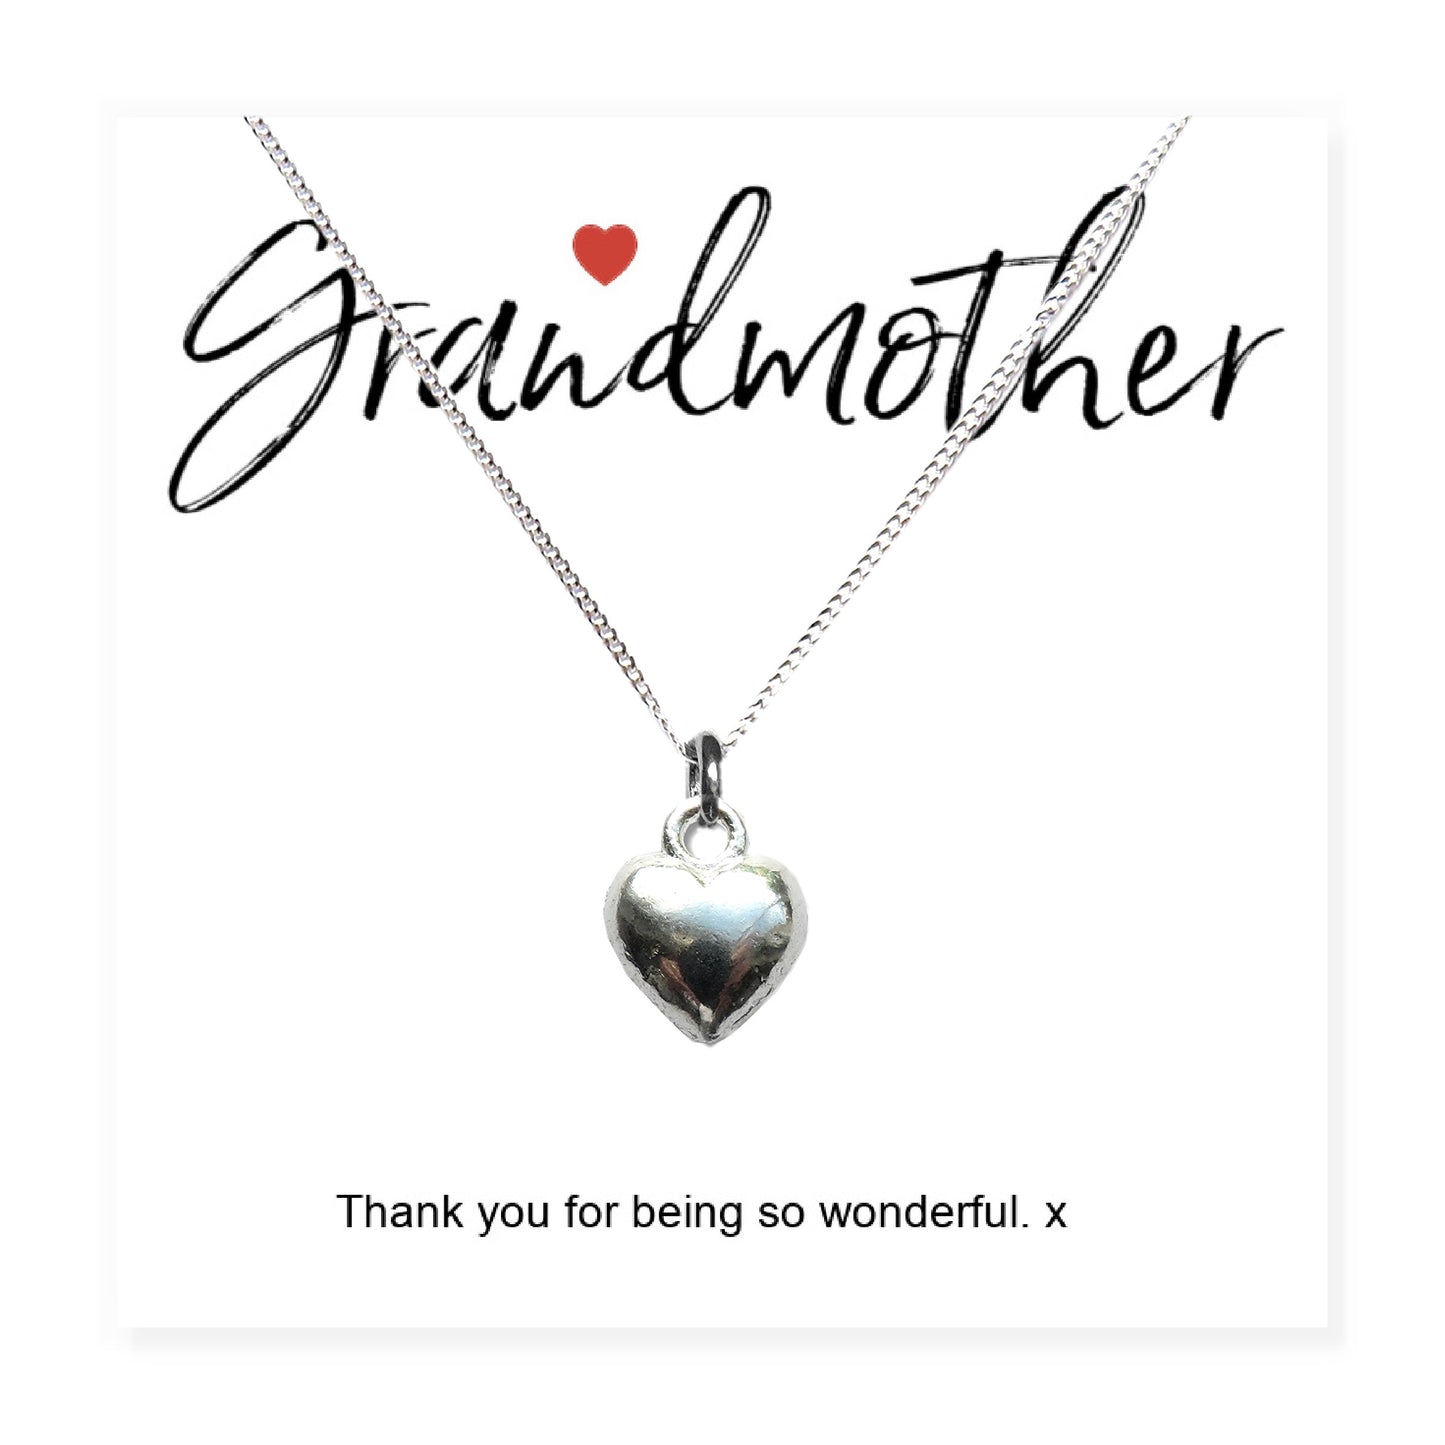 Grandmother Little Quote Gift Card with Heart Necklace